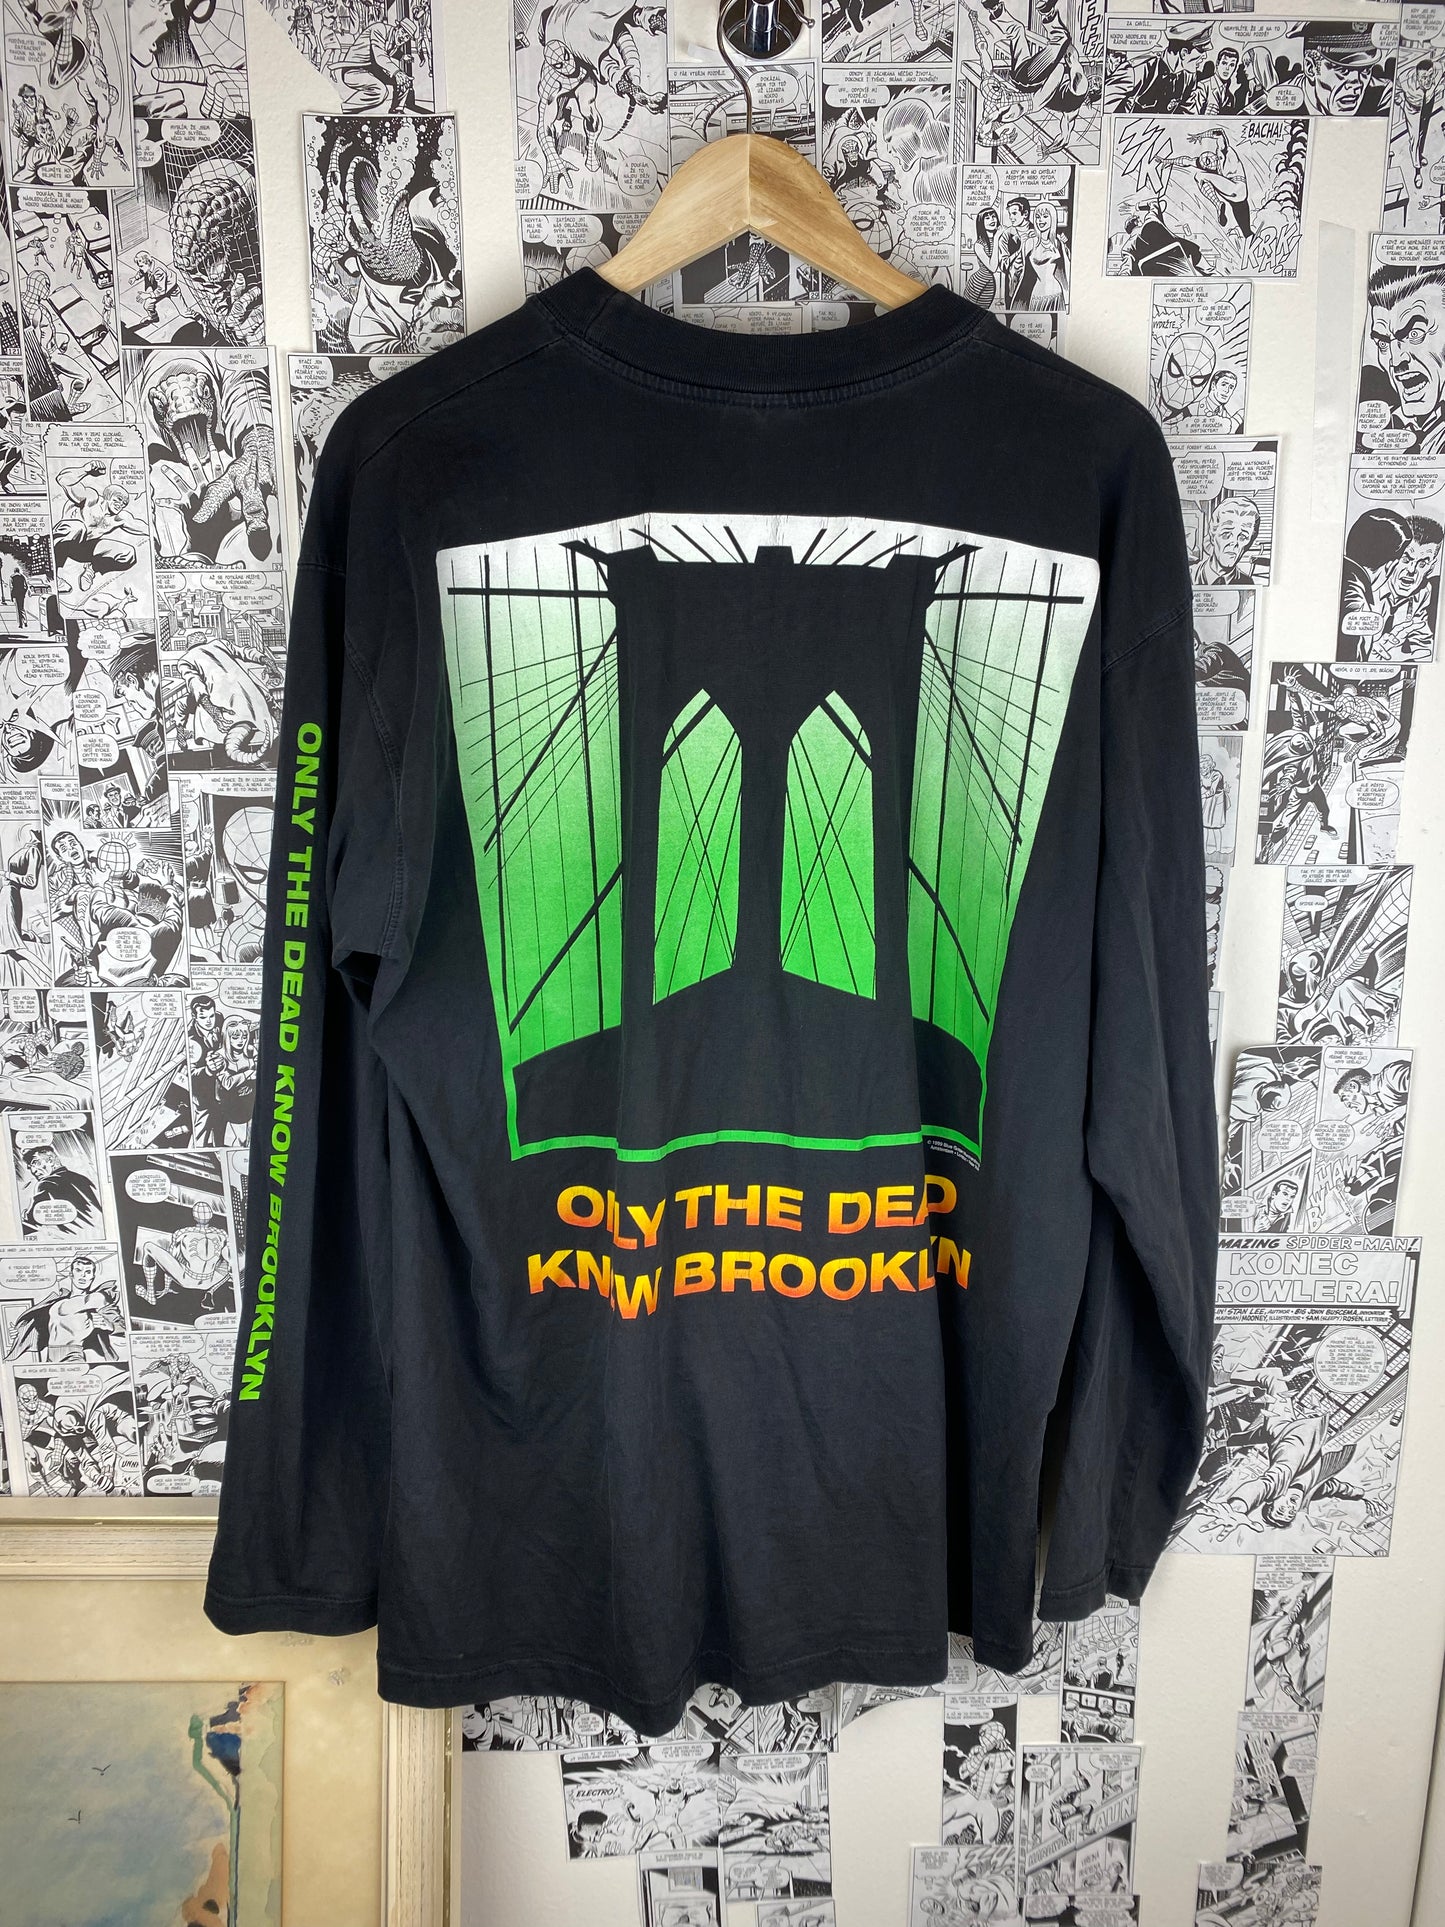 Vintage Type O Negative “World Coming Down” 1999 t-shirt - size L